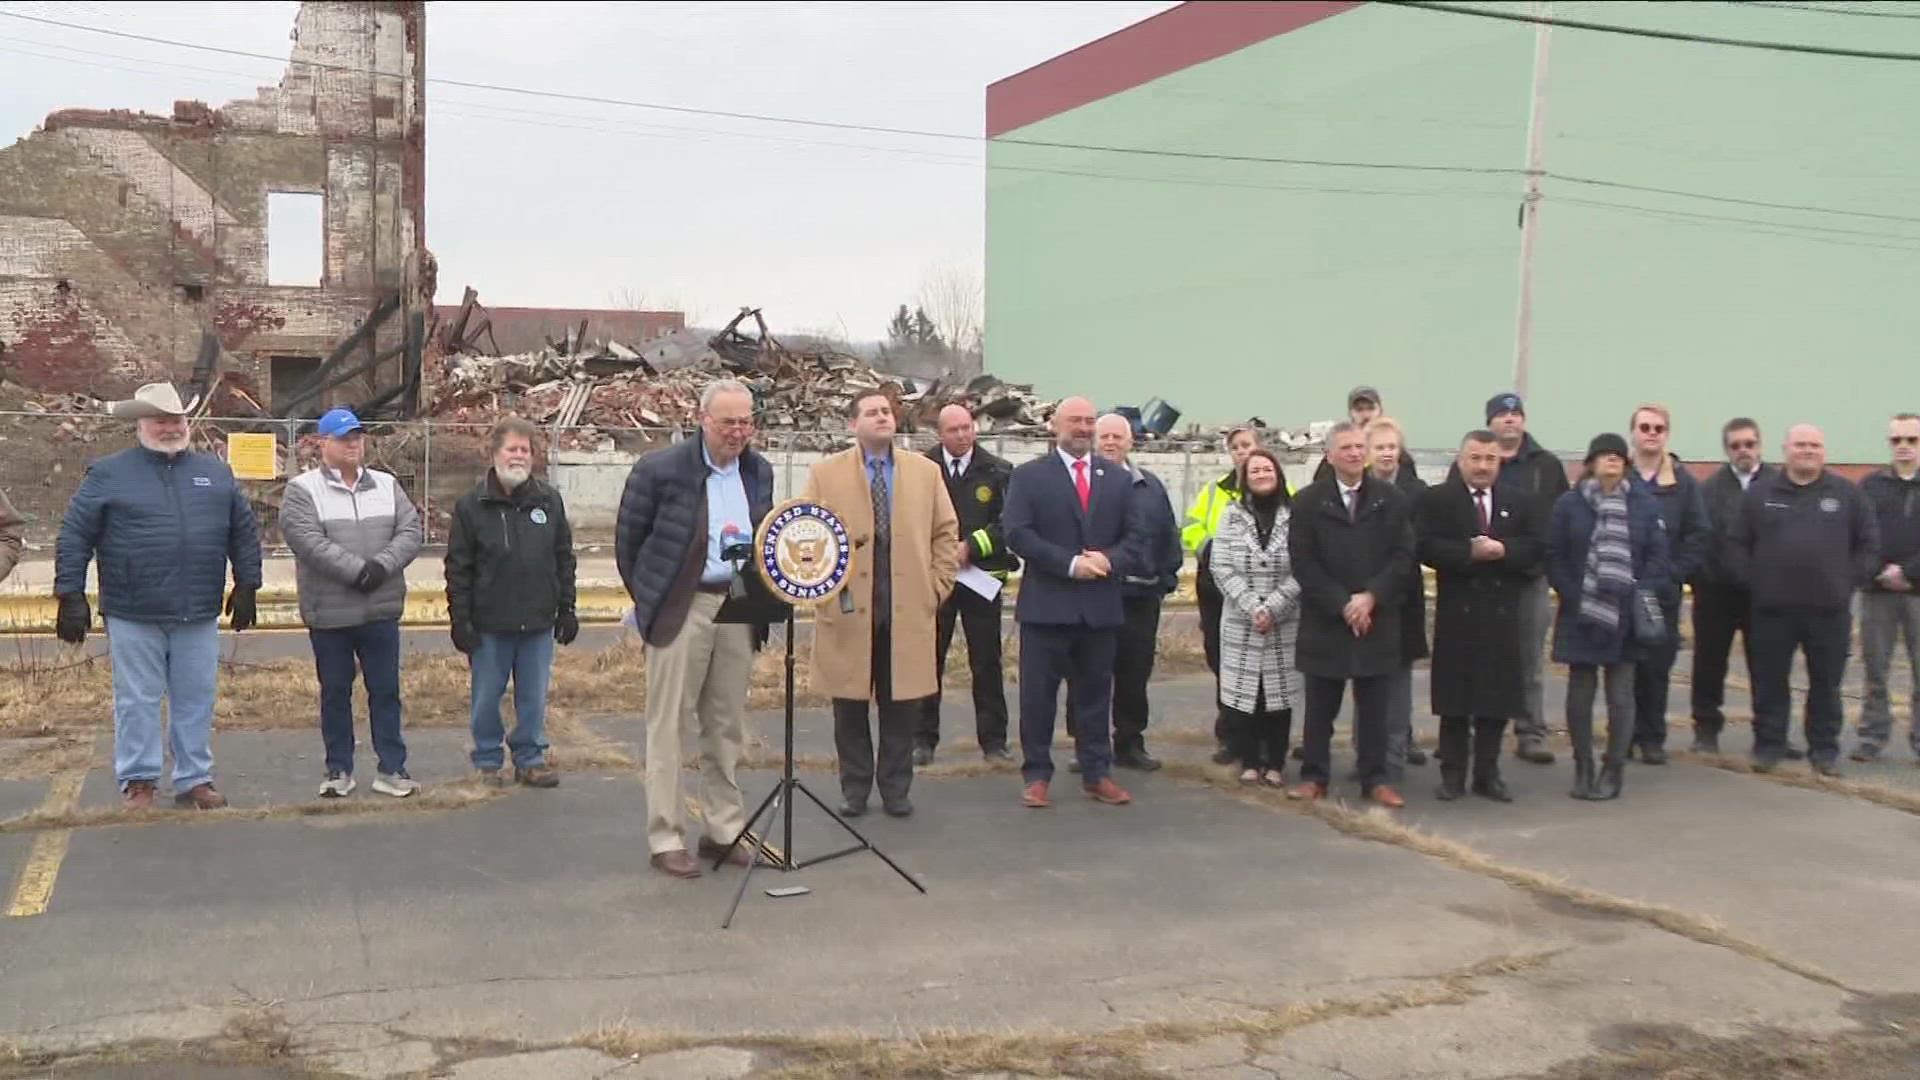 That declaration would allow money for contaminated sites cleanup to flow into Jamestown says Senator Chuck Schumer...